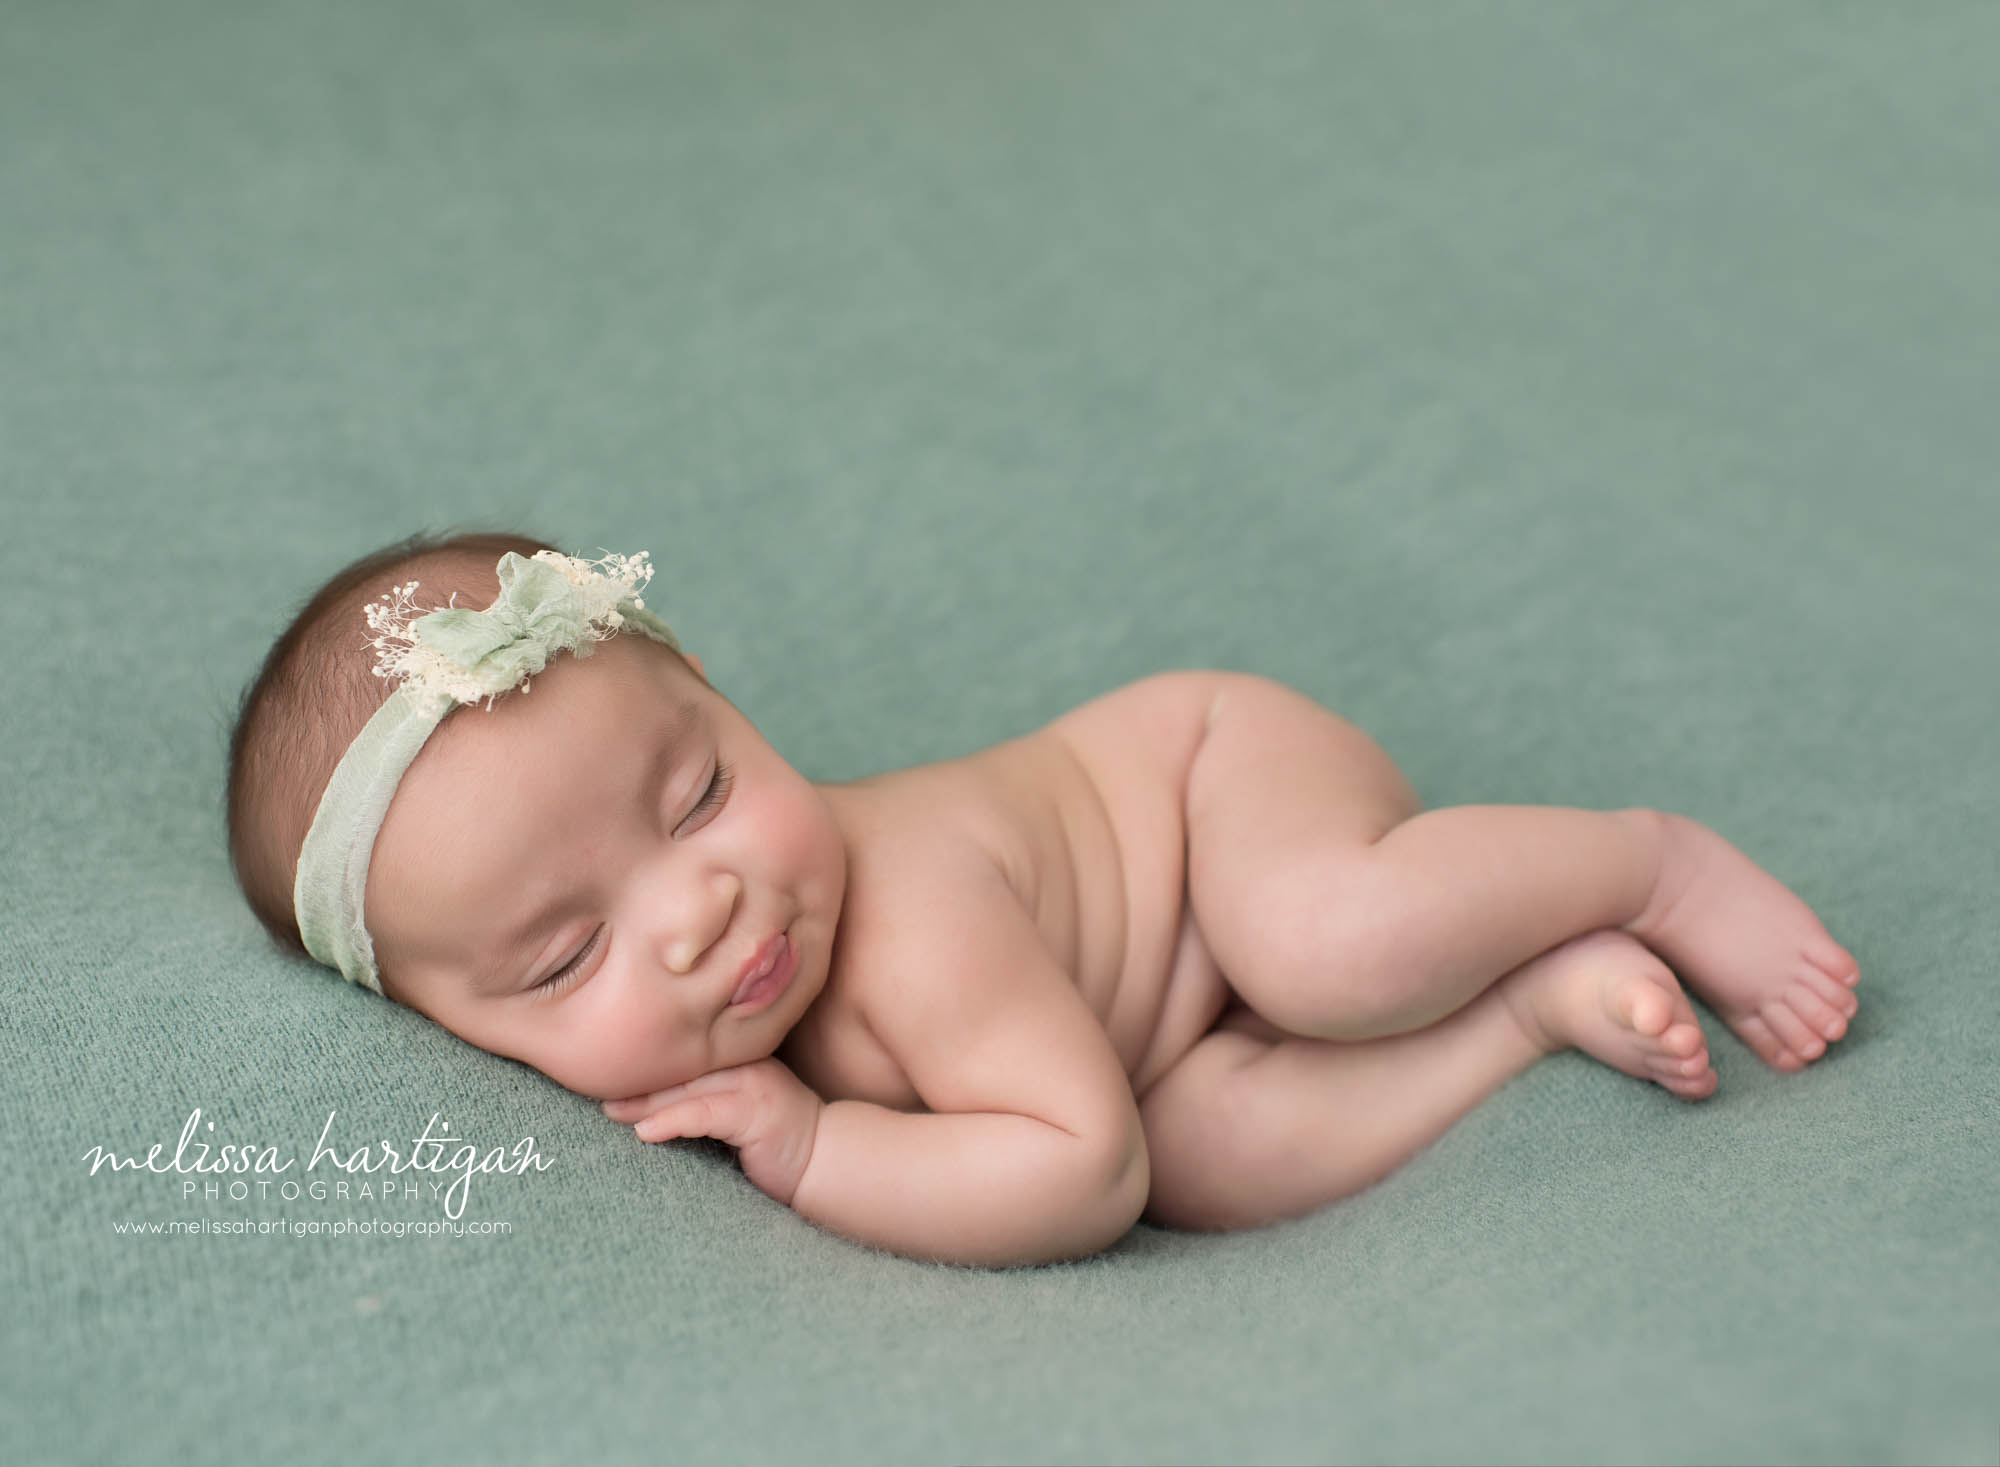 newborn baby girl posed on side with teal green colored flower headband Windsor CT newborn Photography